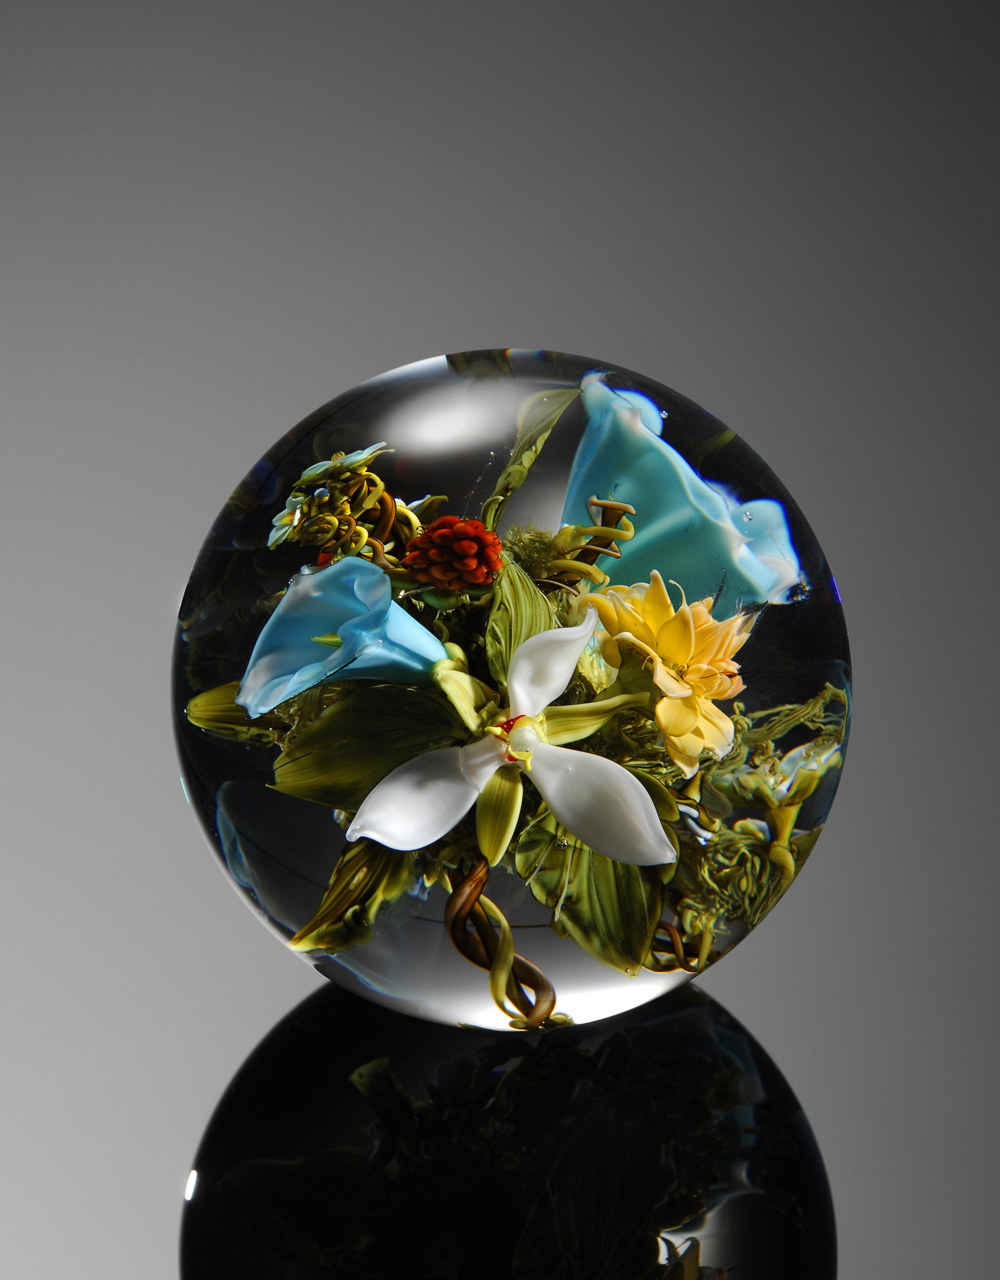 A resin globe filled with flowers against a grey background.